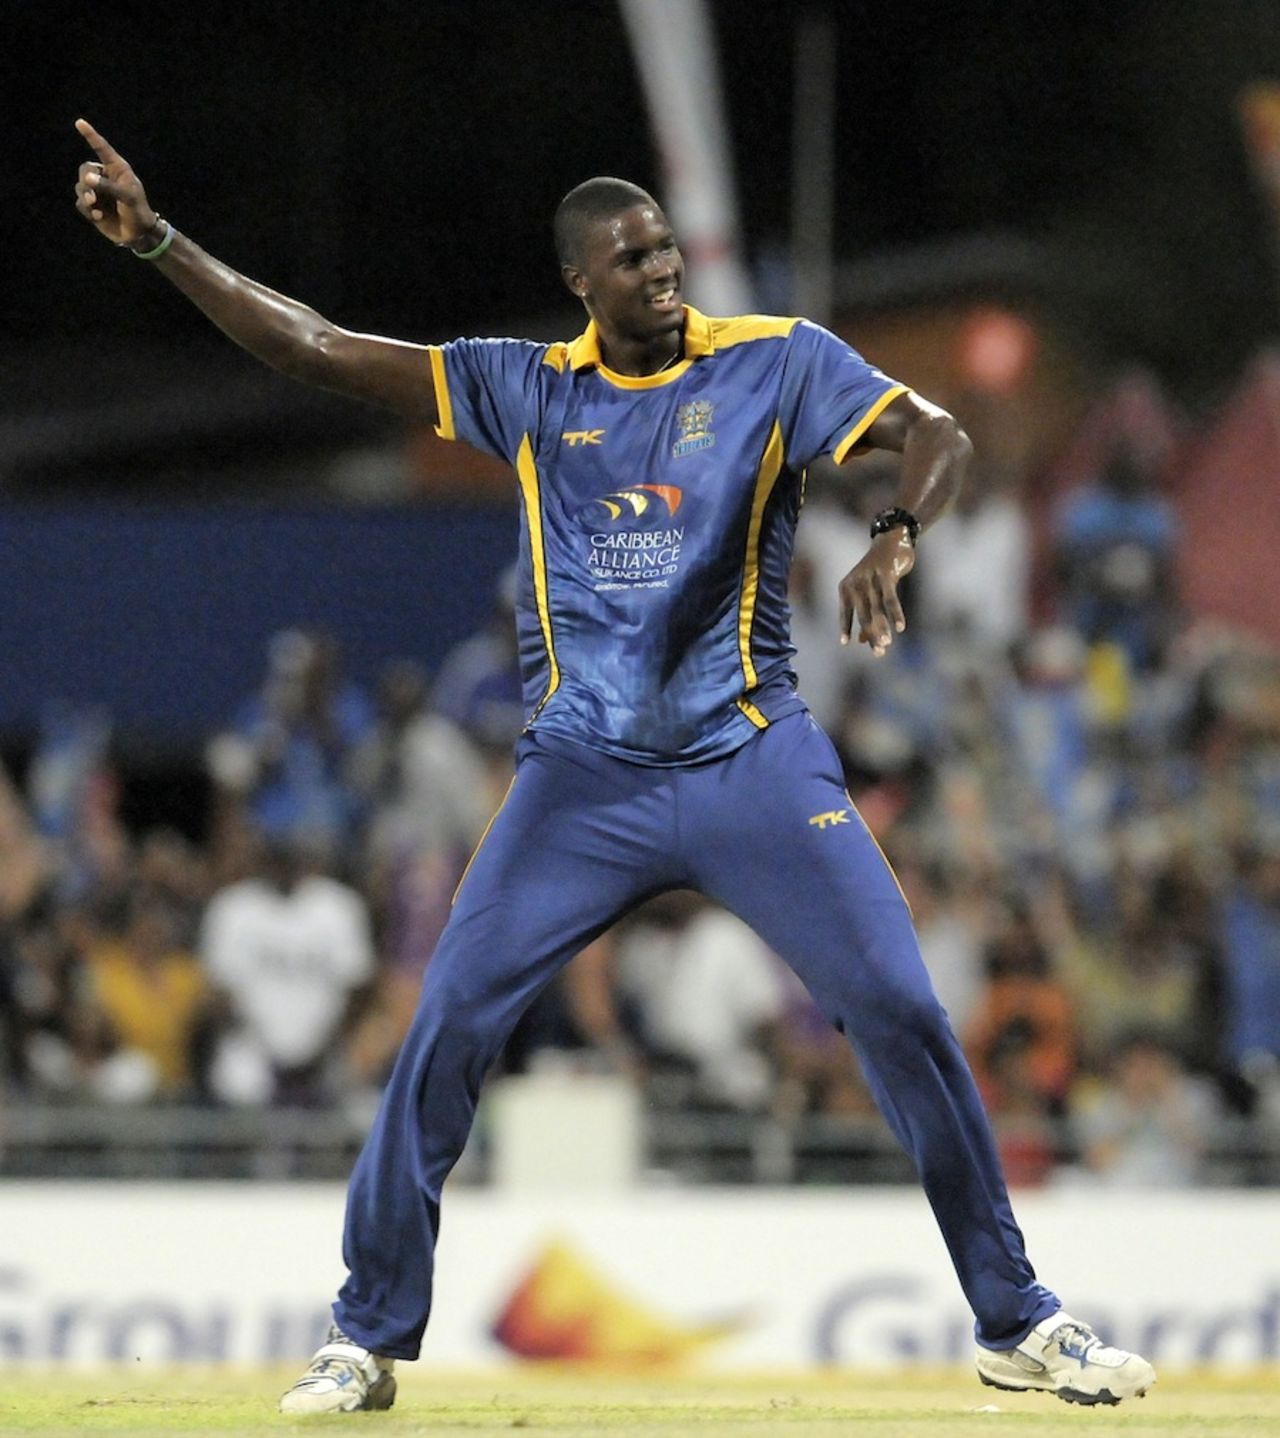 Jason Holder picked up two wickets, Barbados Tridents v Trinidad & Tobago Red Steel, Caribbean Premier League, Bridgetown, August 3, 2013